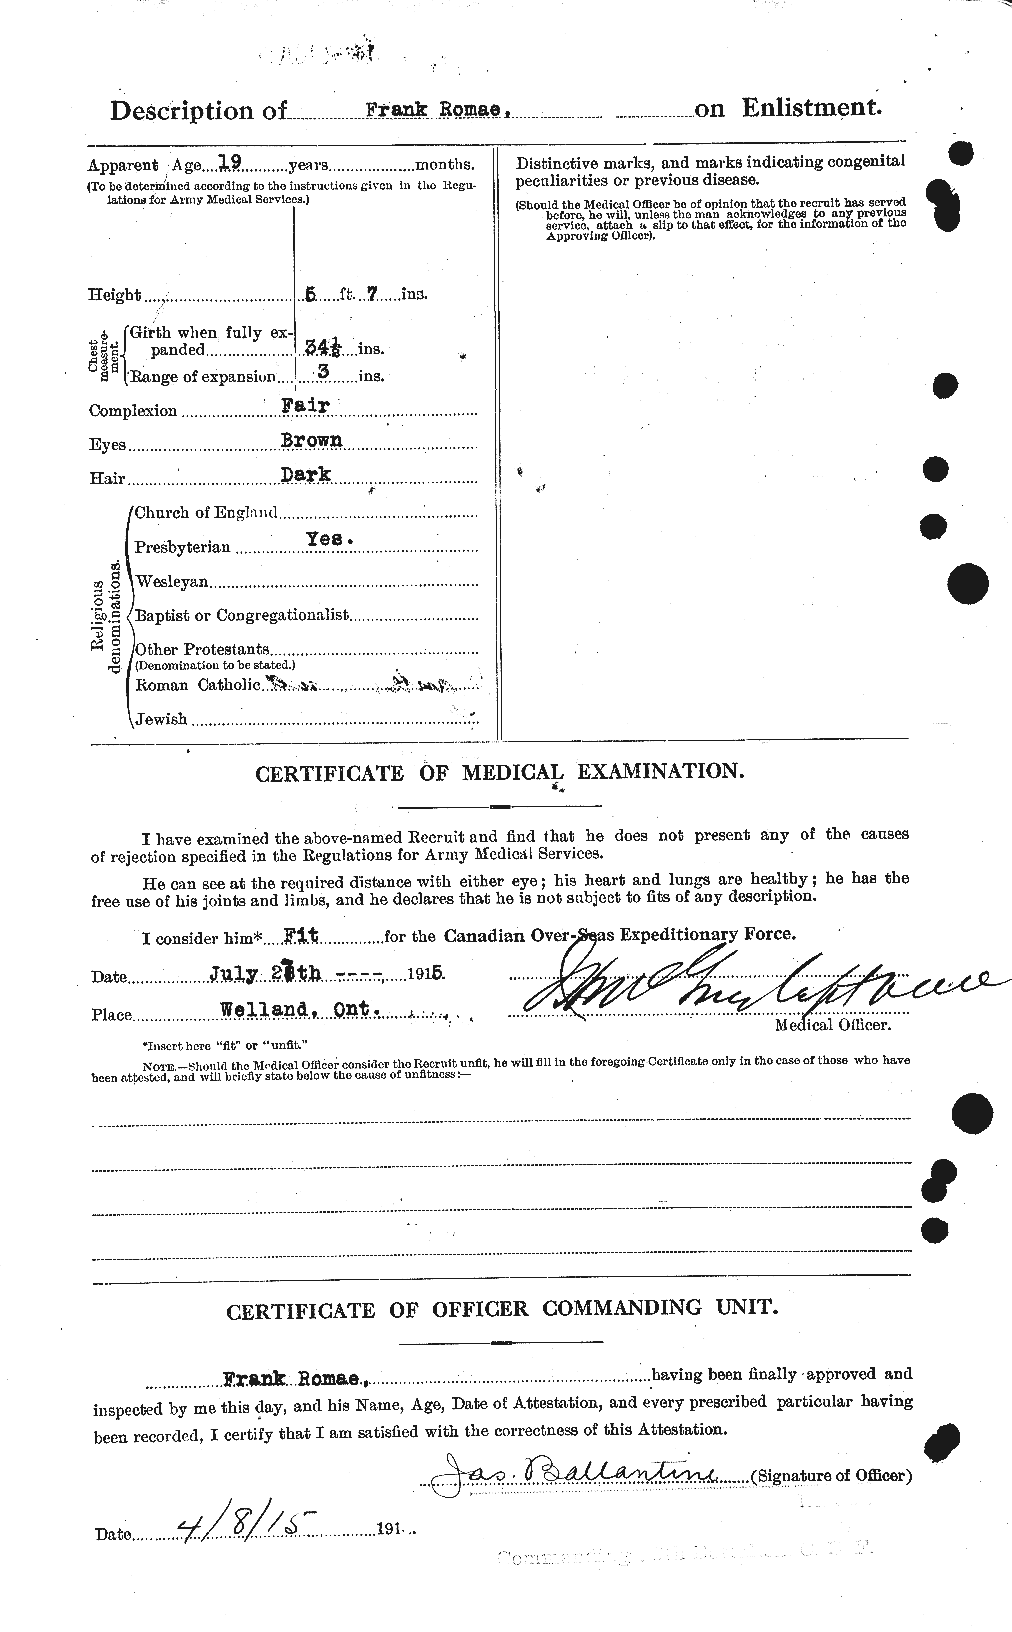 Personnel Records of the First World War - CEF 613606b